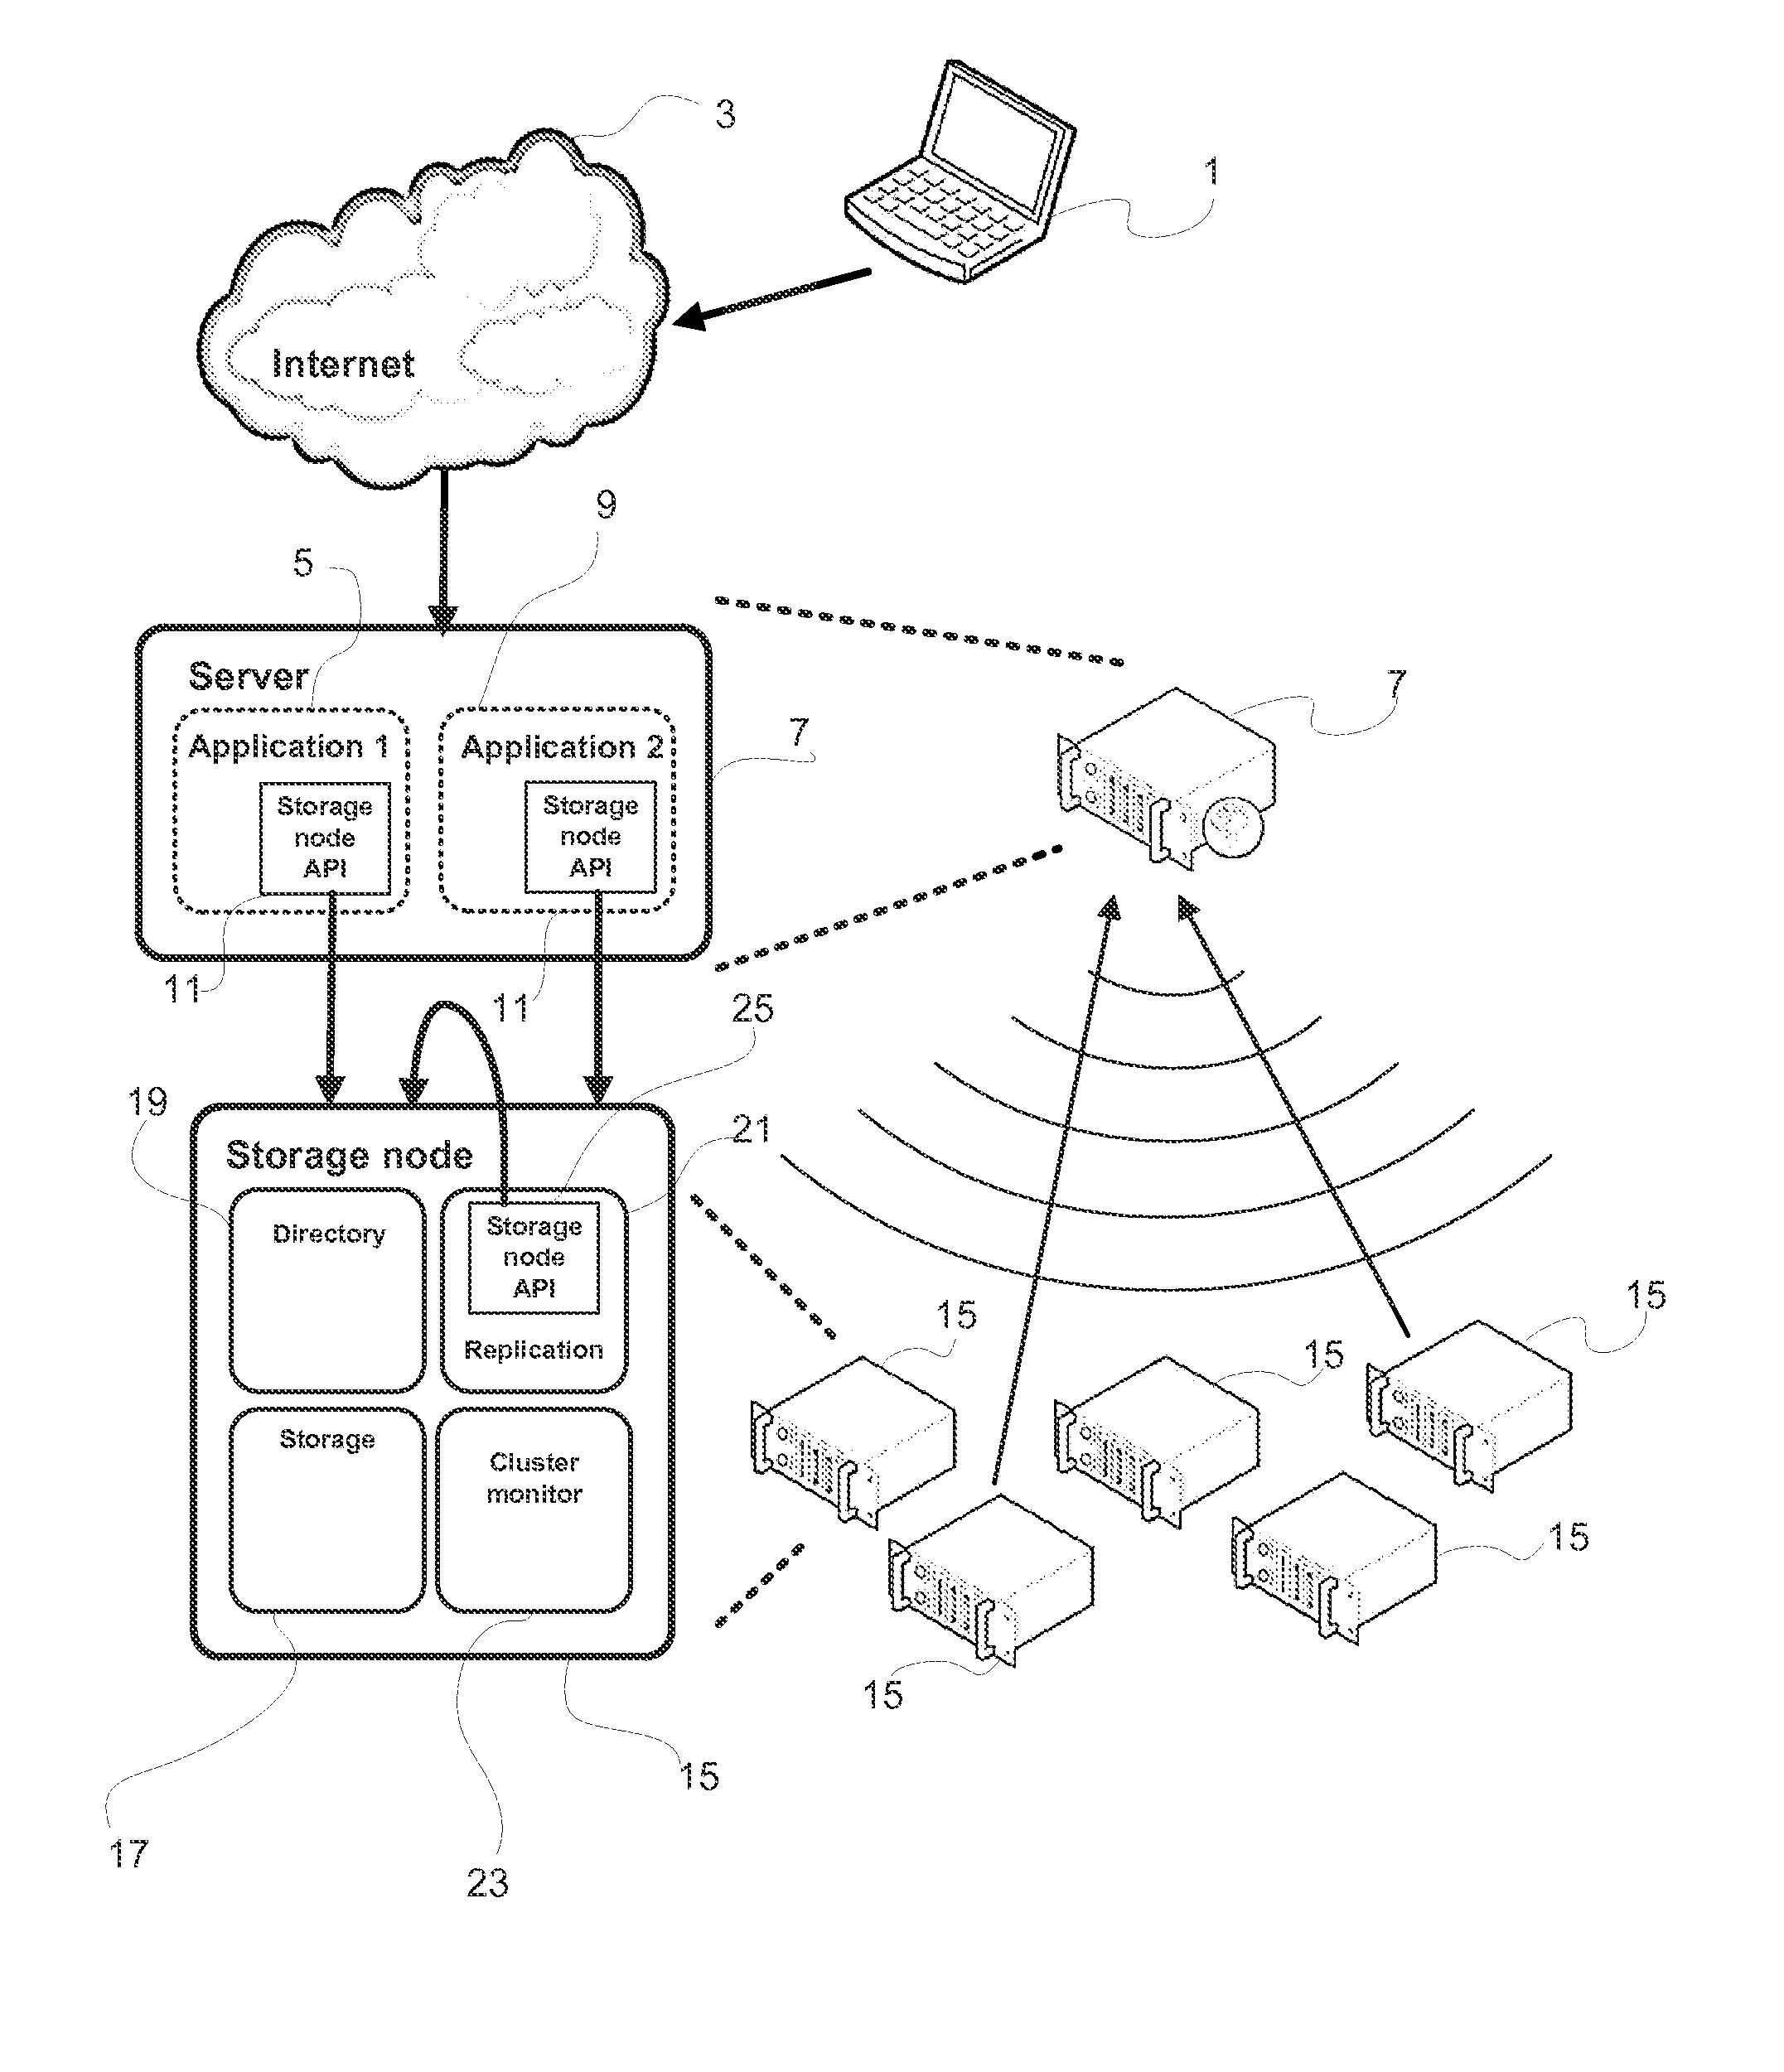 Method And Device For Maintaining Data In A Data Storage System Comprising A Plurality Of Data Storage Nodes